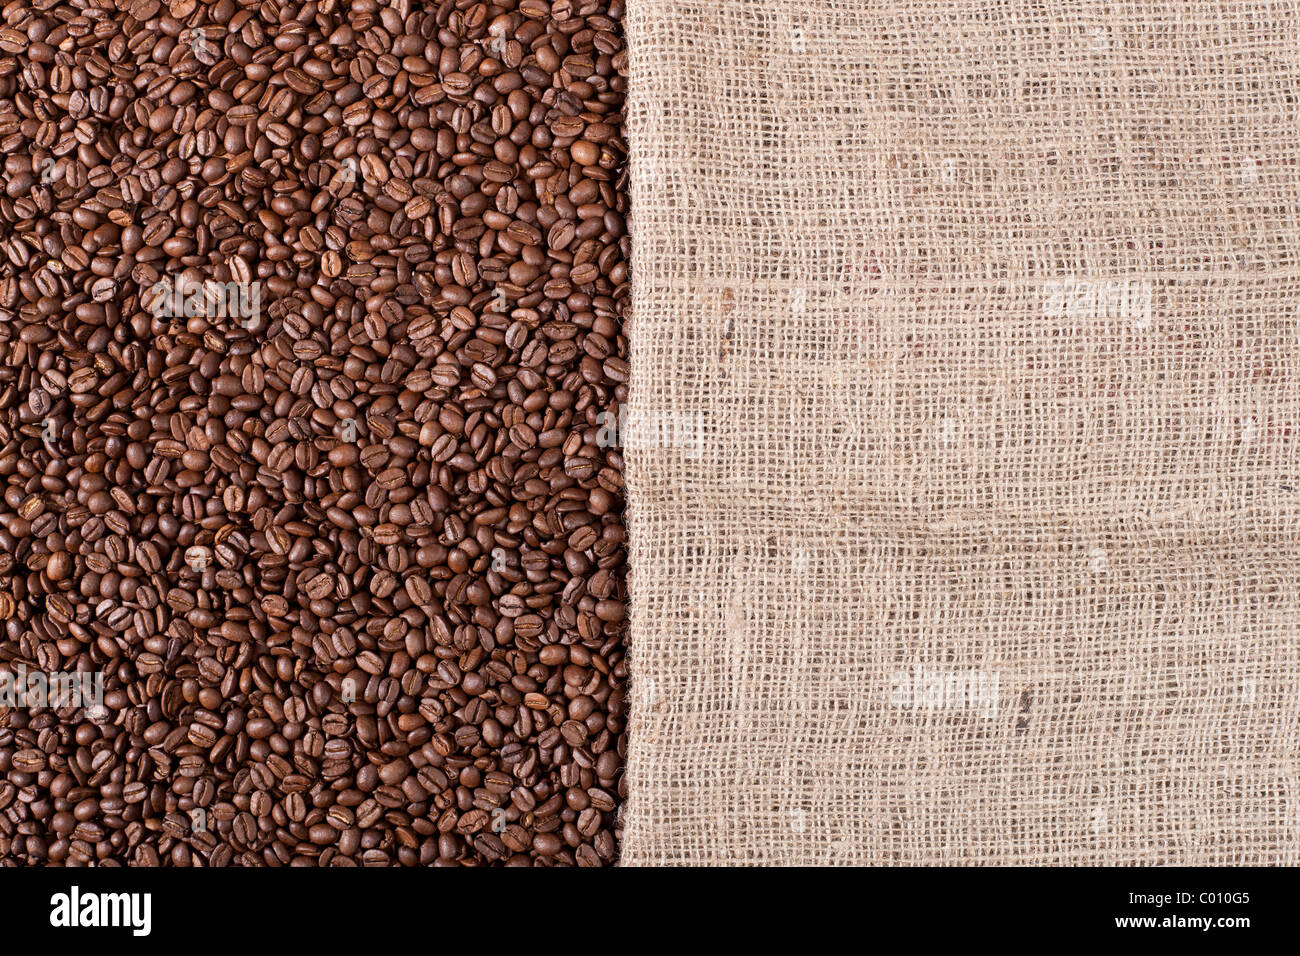 Background image of many coffee beans and a canvas sack filling the picture Stock Photo